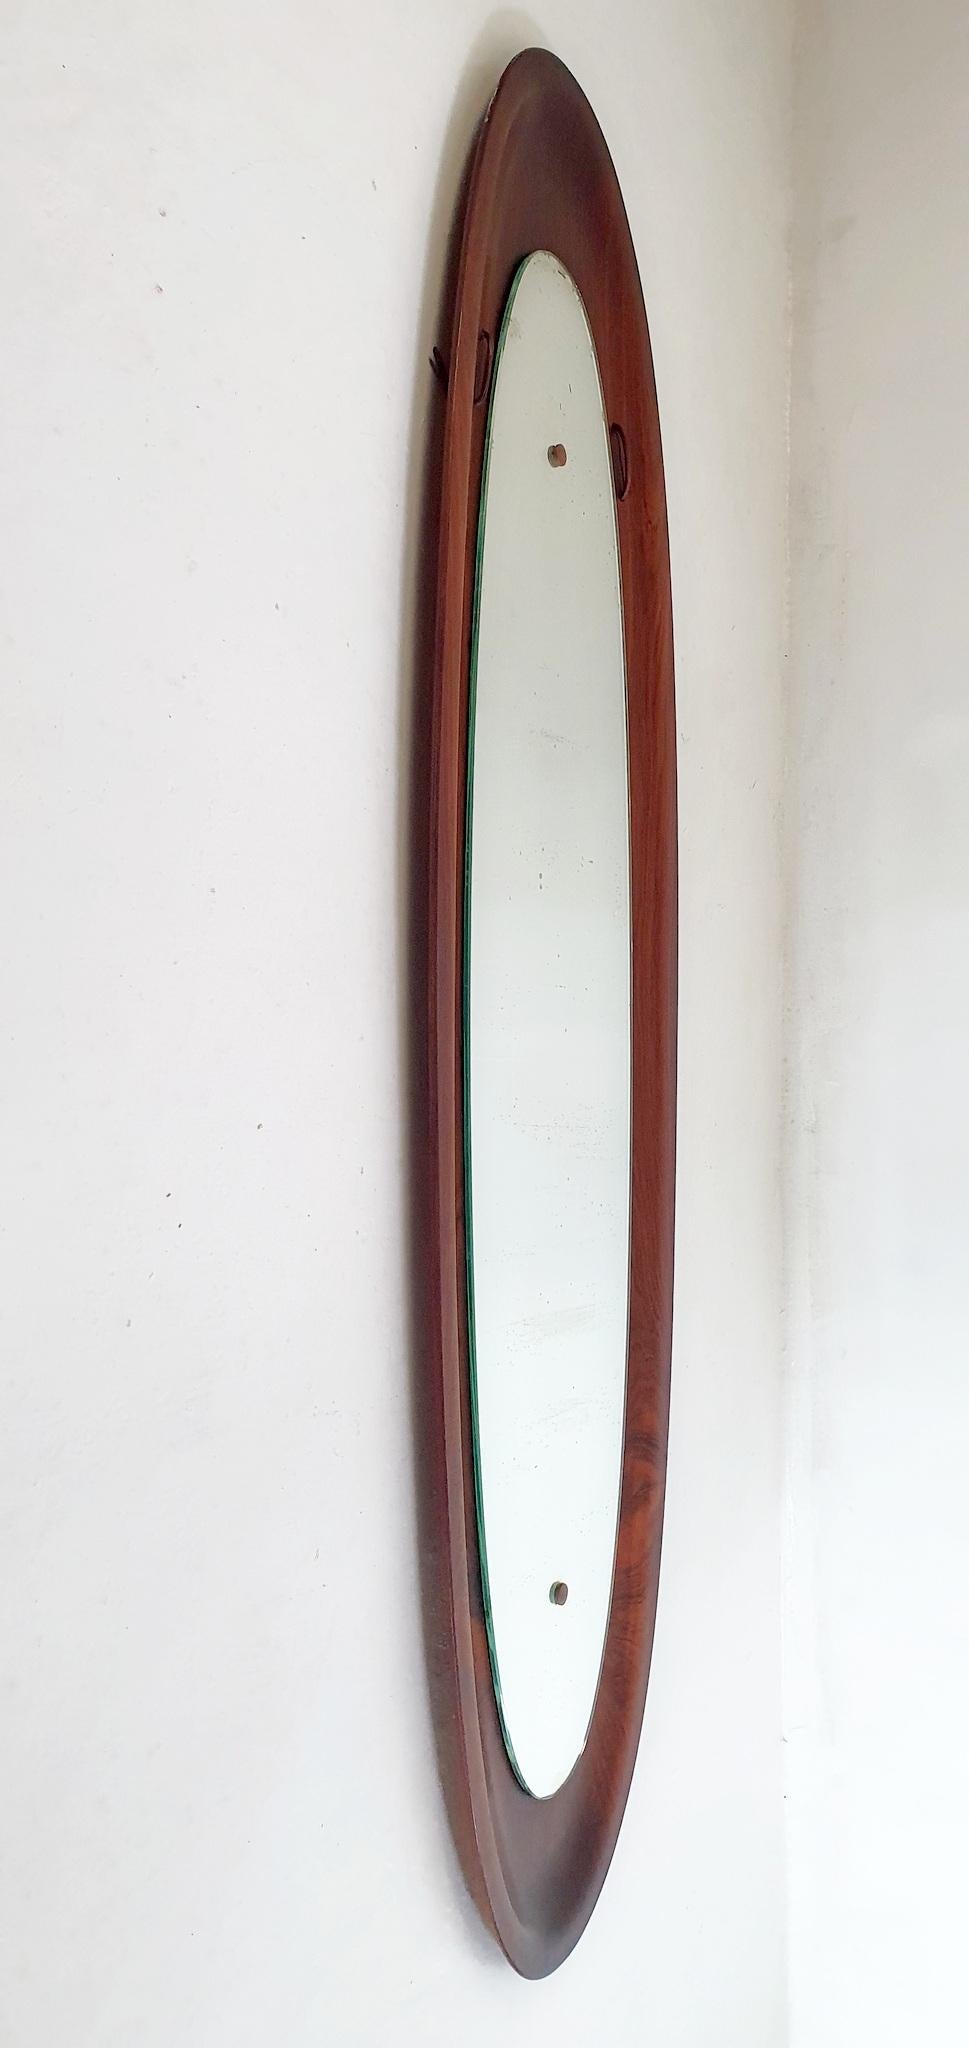 An oval wall mirror in pressed teak wood reminiscent of a surfboard. The glass has beauty spots but can be replaced upon purchase for an additional cost. Besides the glass the wood frame is in very nice condition without breakage or blemishes.